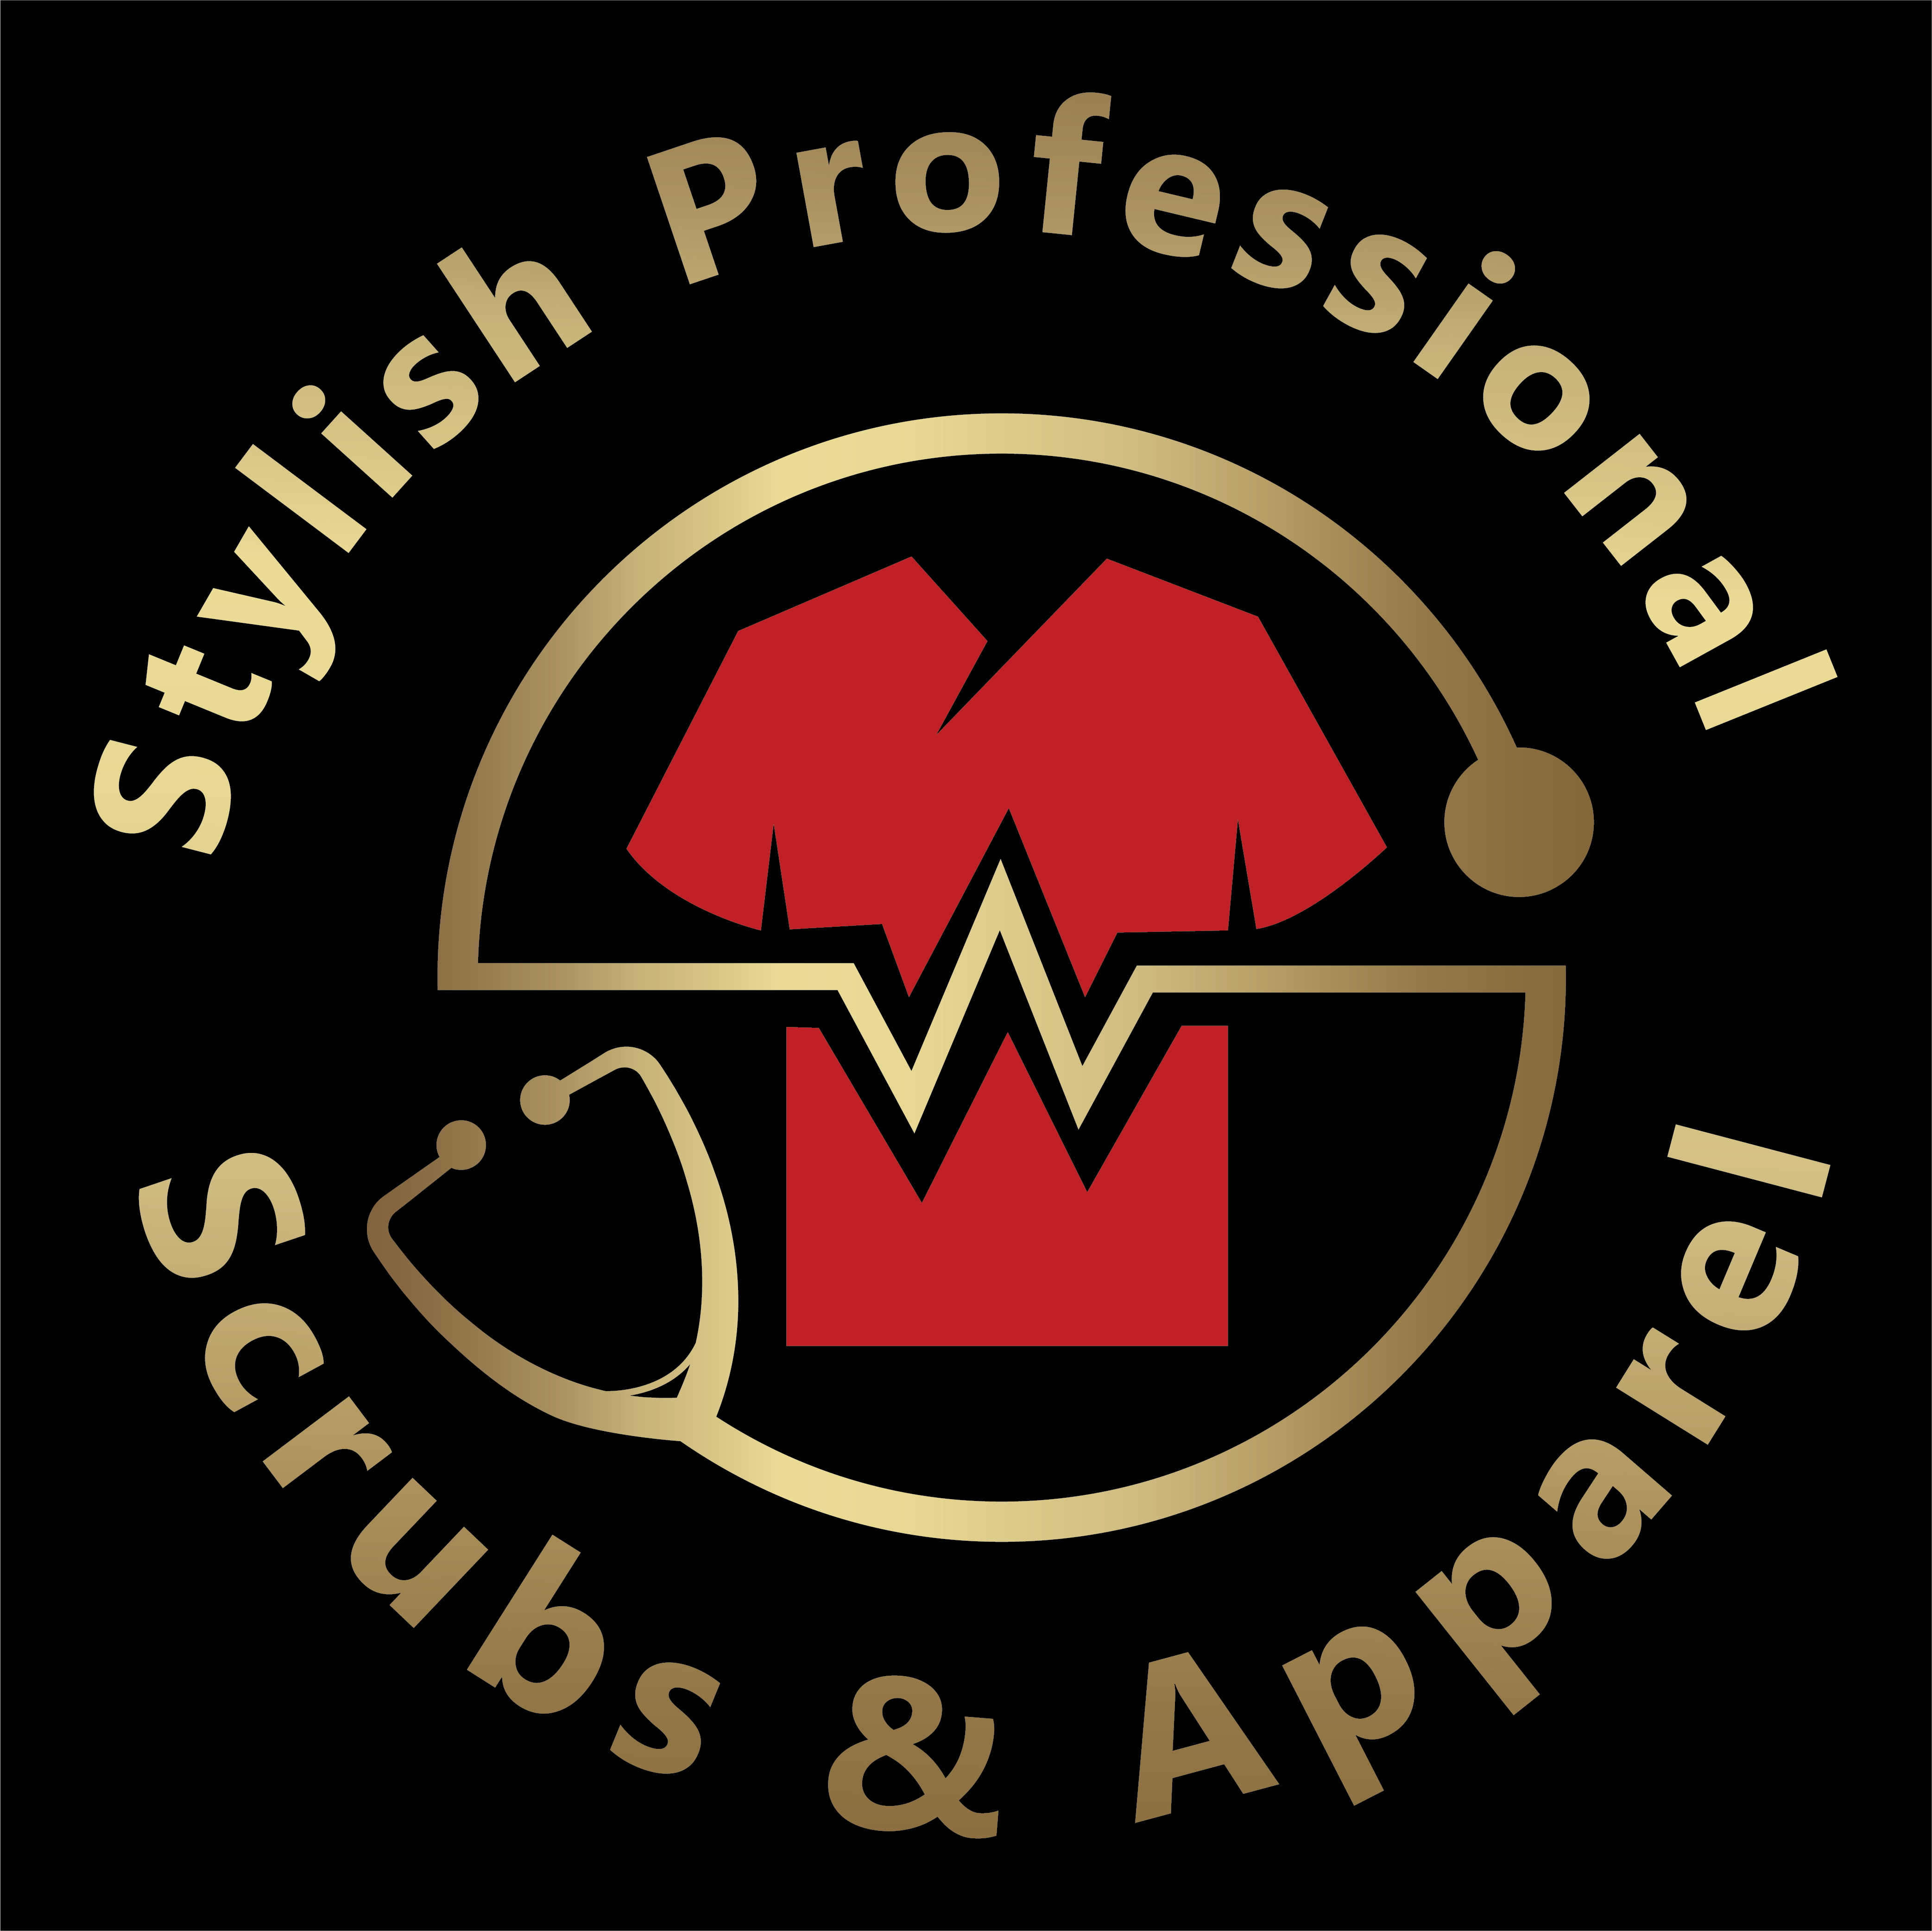 Announcing the Launch of Stylish Professional Scrubs & Apparel LLC